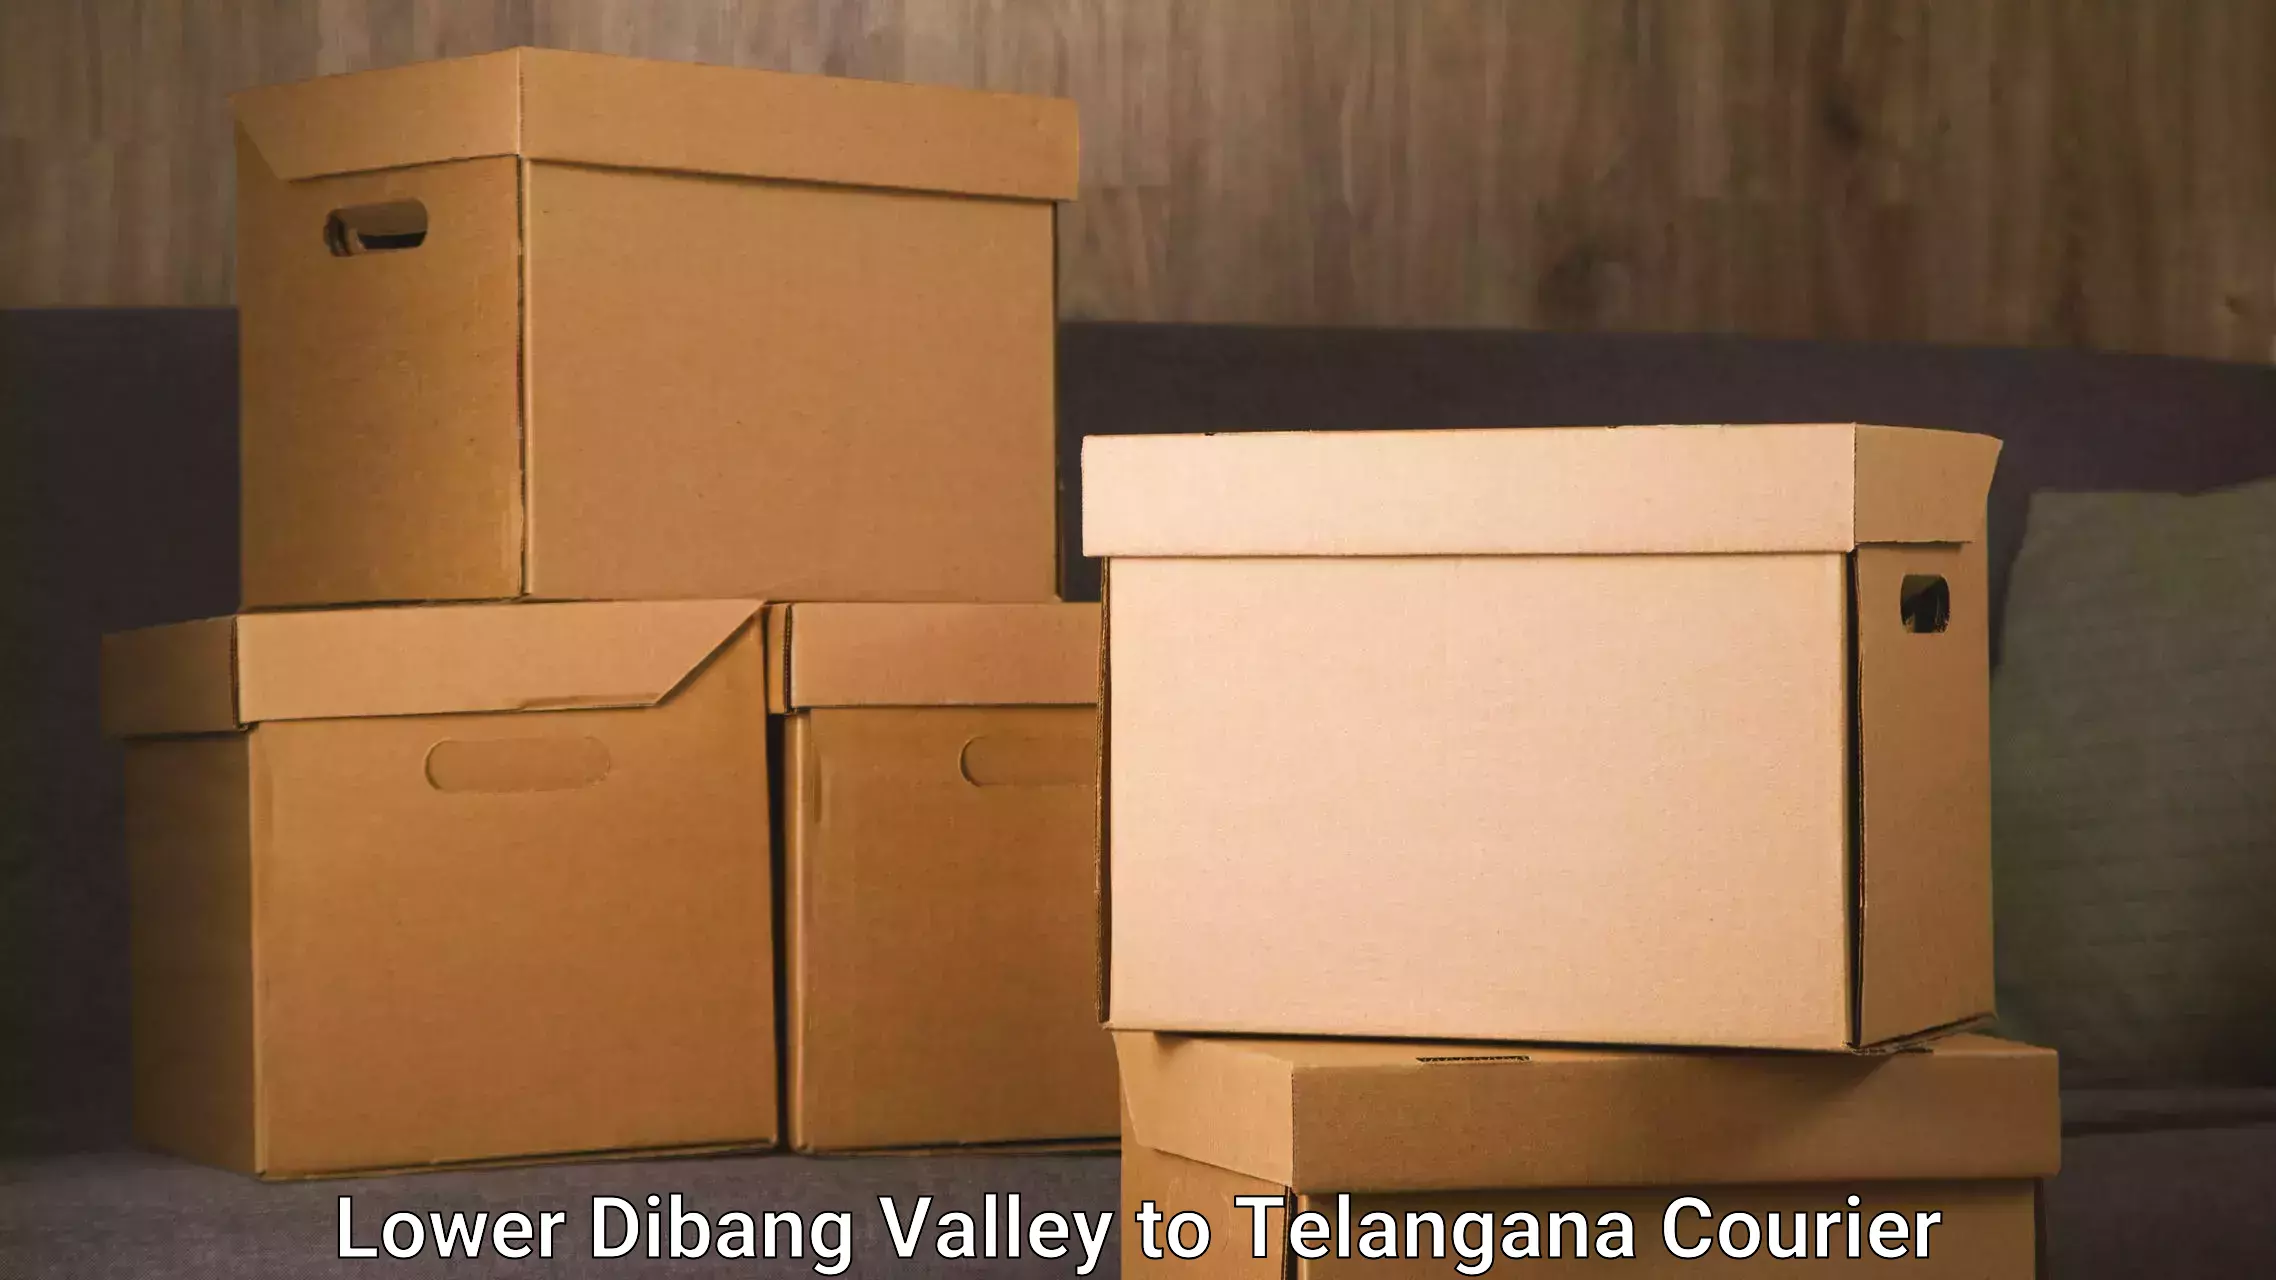 Courier service partnerships Lower Dibang Valley to Jannaram